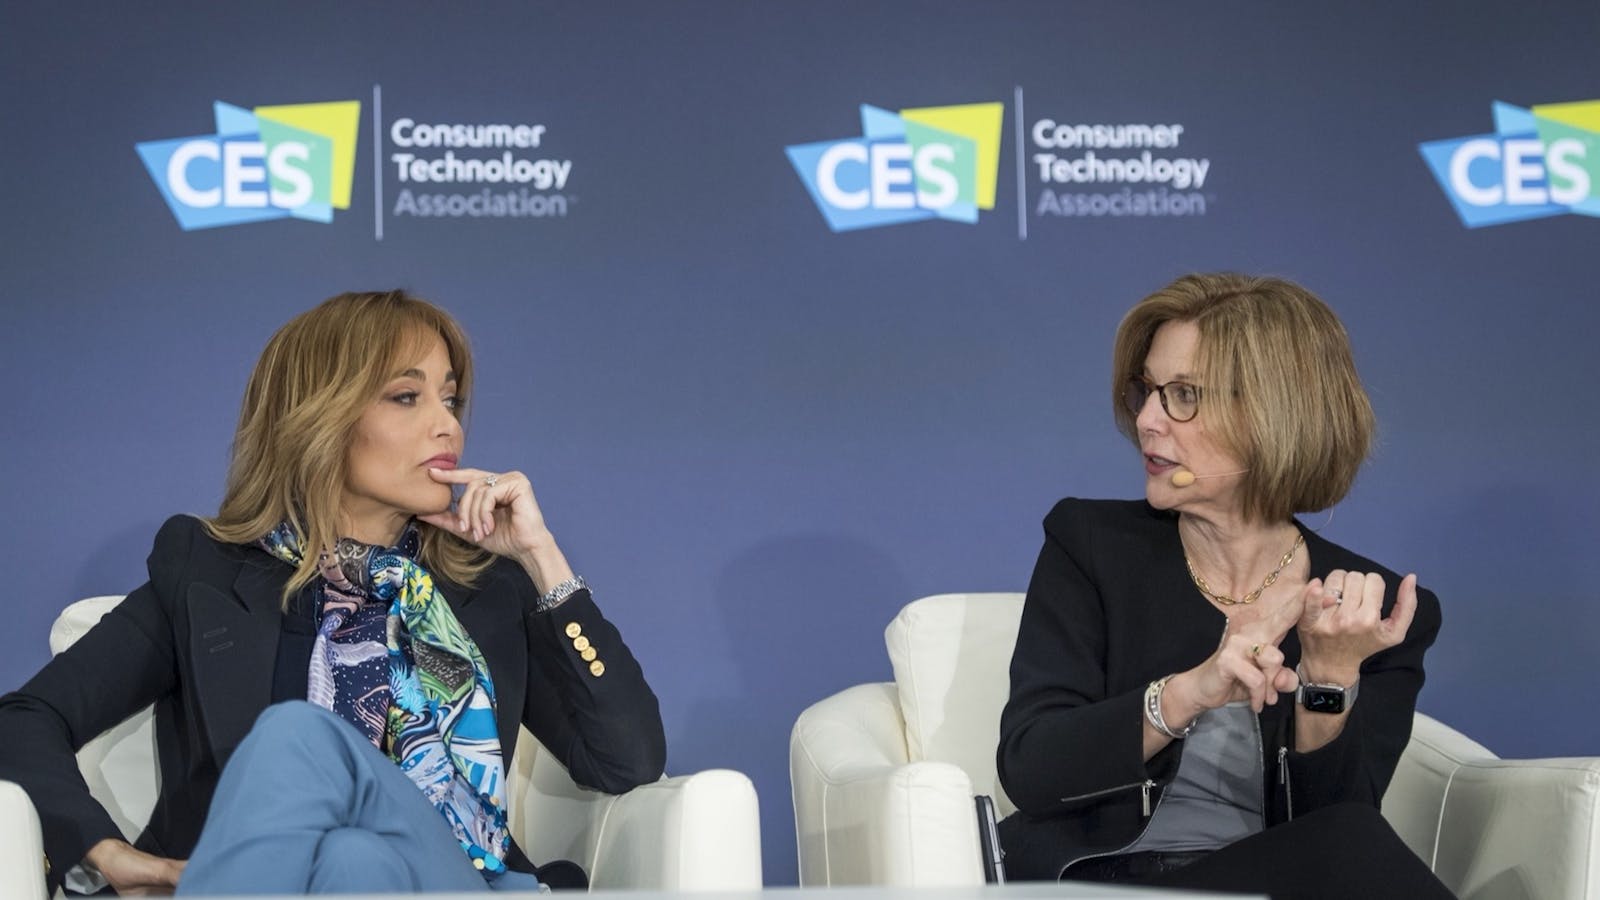 Erin Egan, chief privacy officer at Facebook, left, listens as Jane Horvath, senior director of global privacy at Apple, speaks during a panel discussion at CES. Photo by Bloomberg.